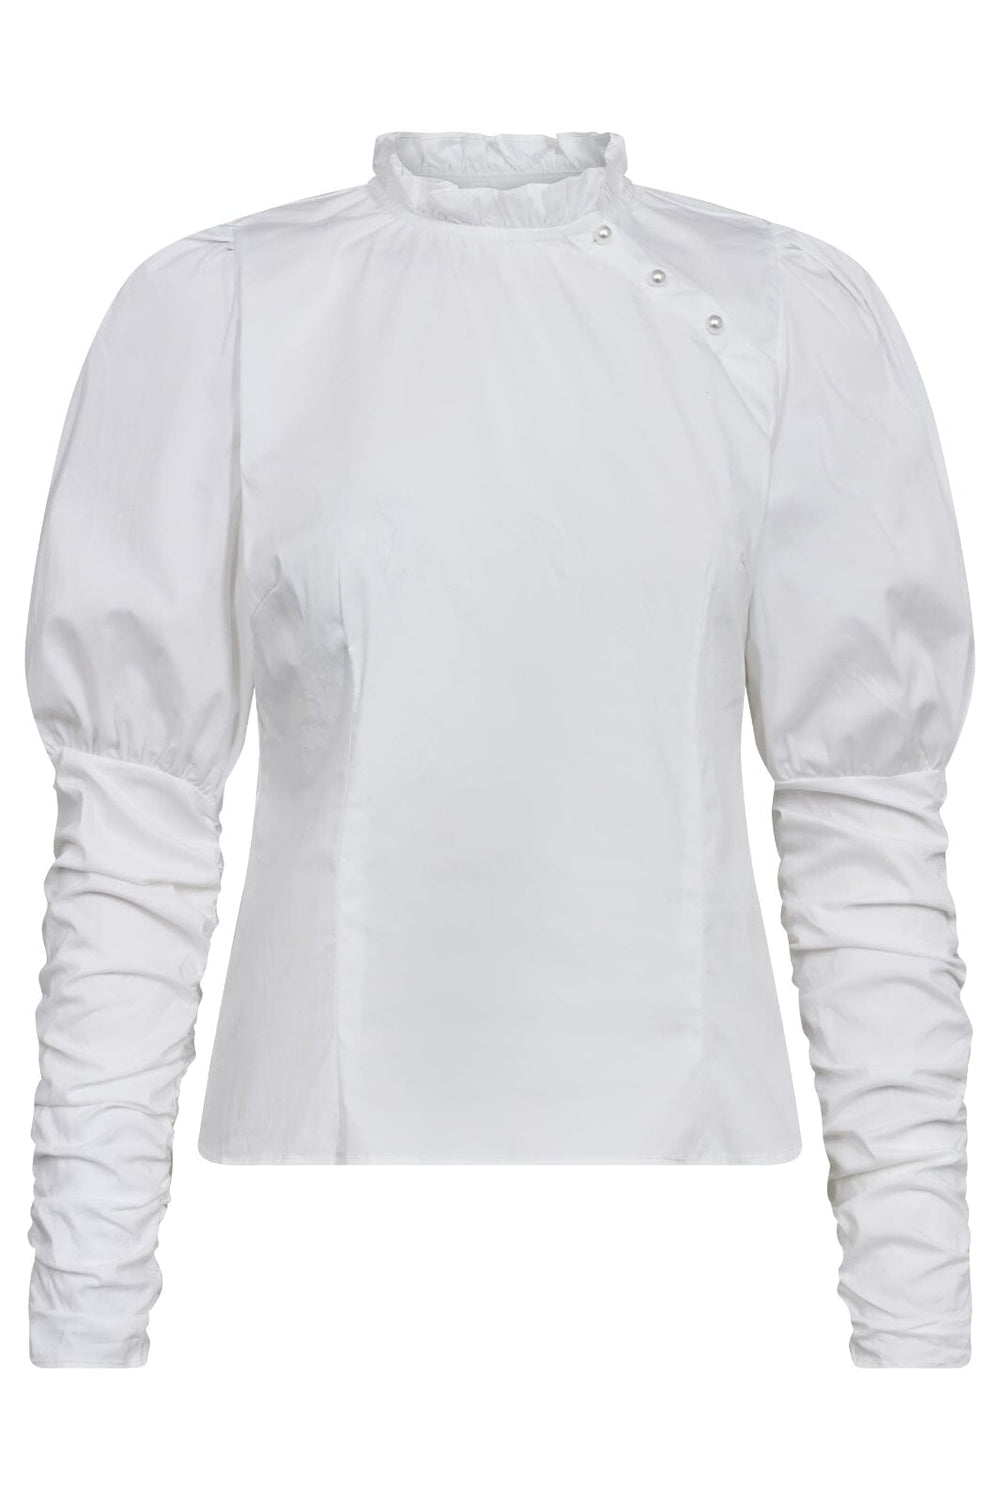 Forudbestilling - Co´couture - Sandycc Pearl Shirt - 4000 White Bluser 